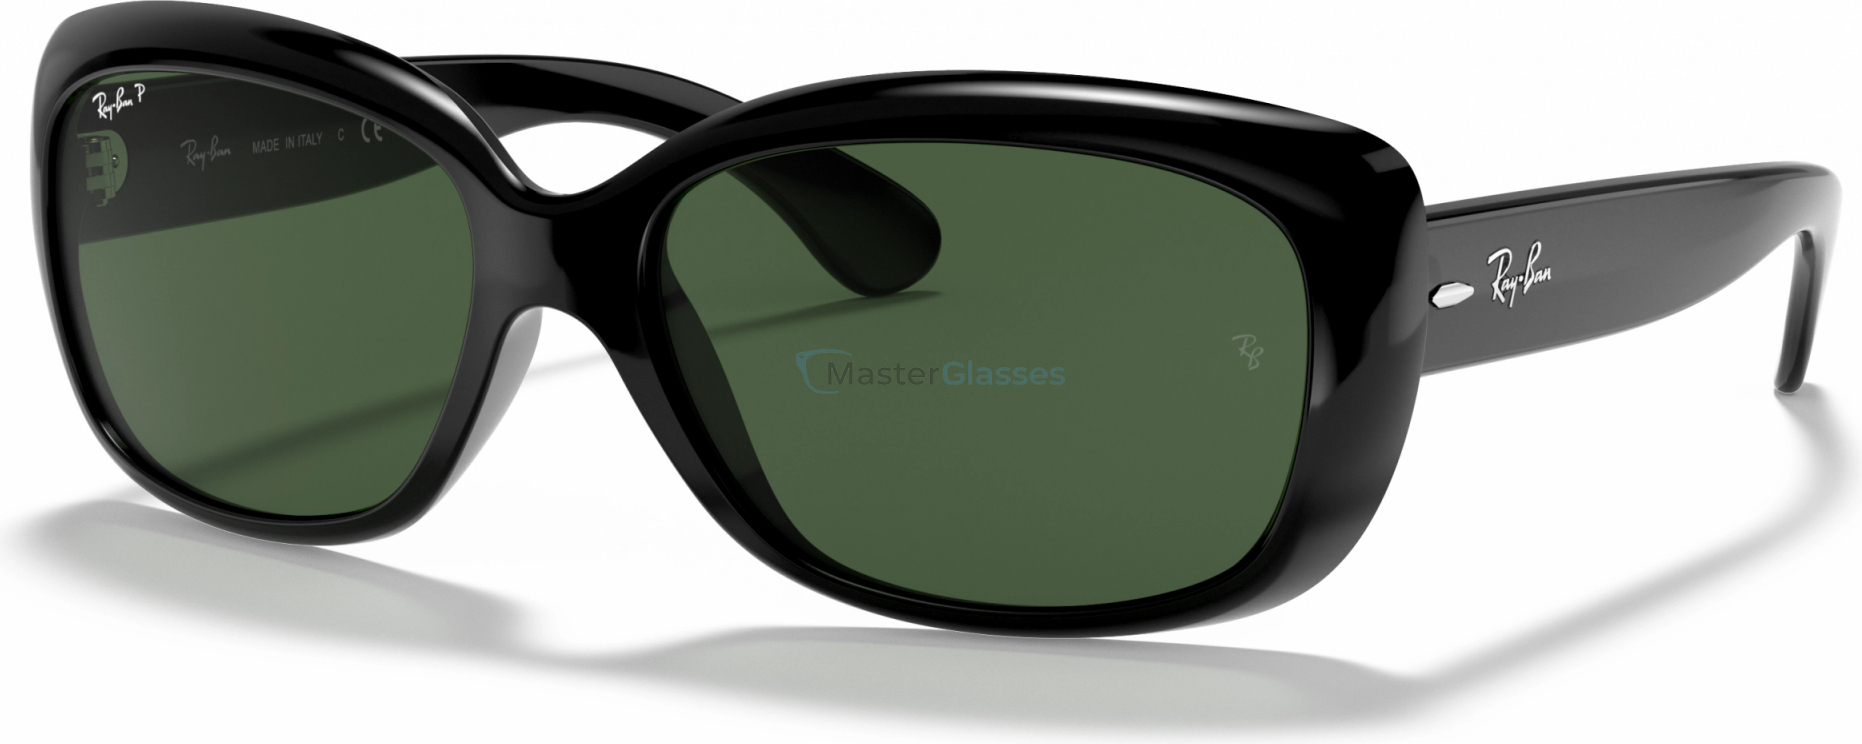   Ray-Ban JACKIE OHH RB4101 601/58 Black